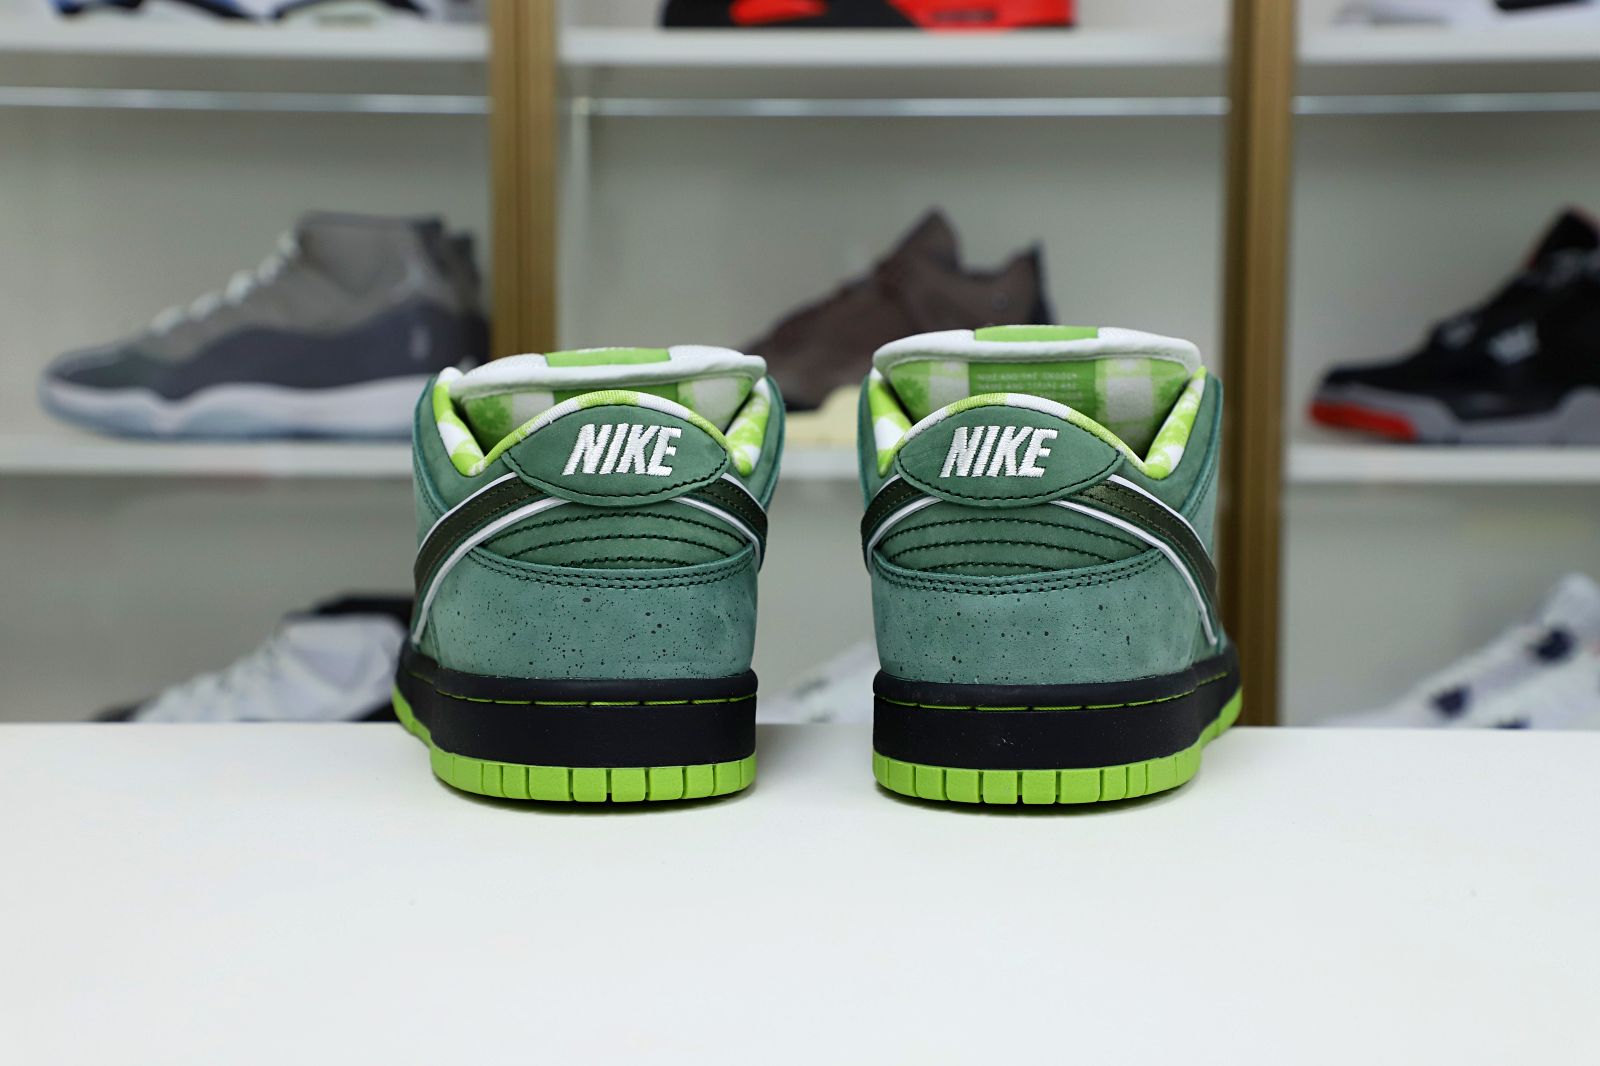 Concepts x Nike SB Dunk Low Green Lobster